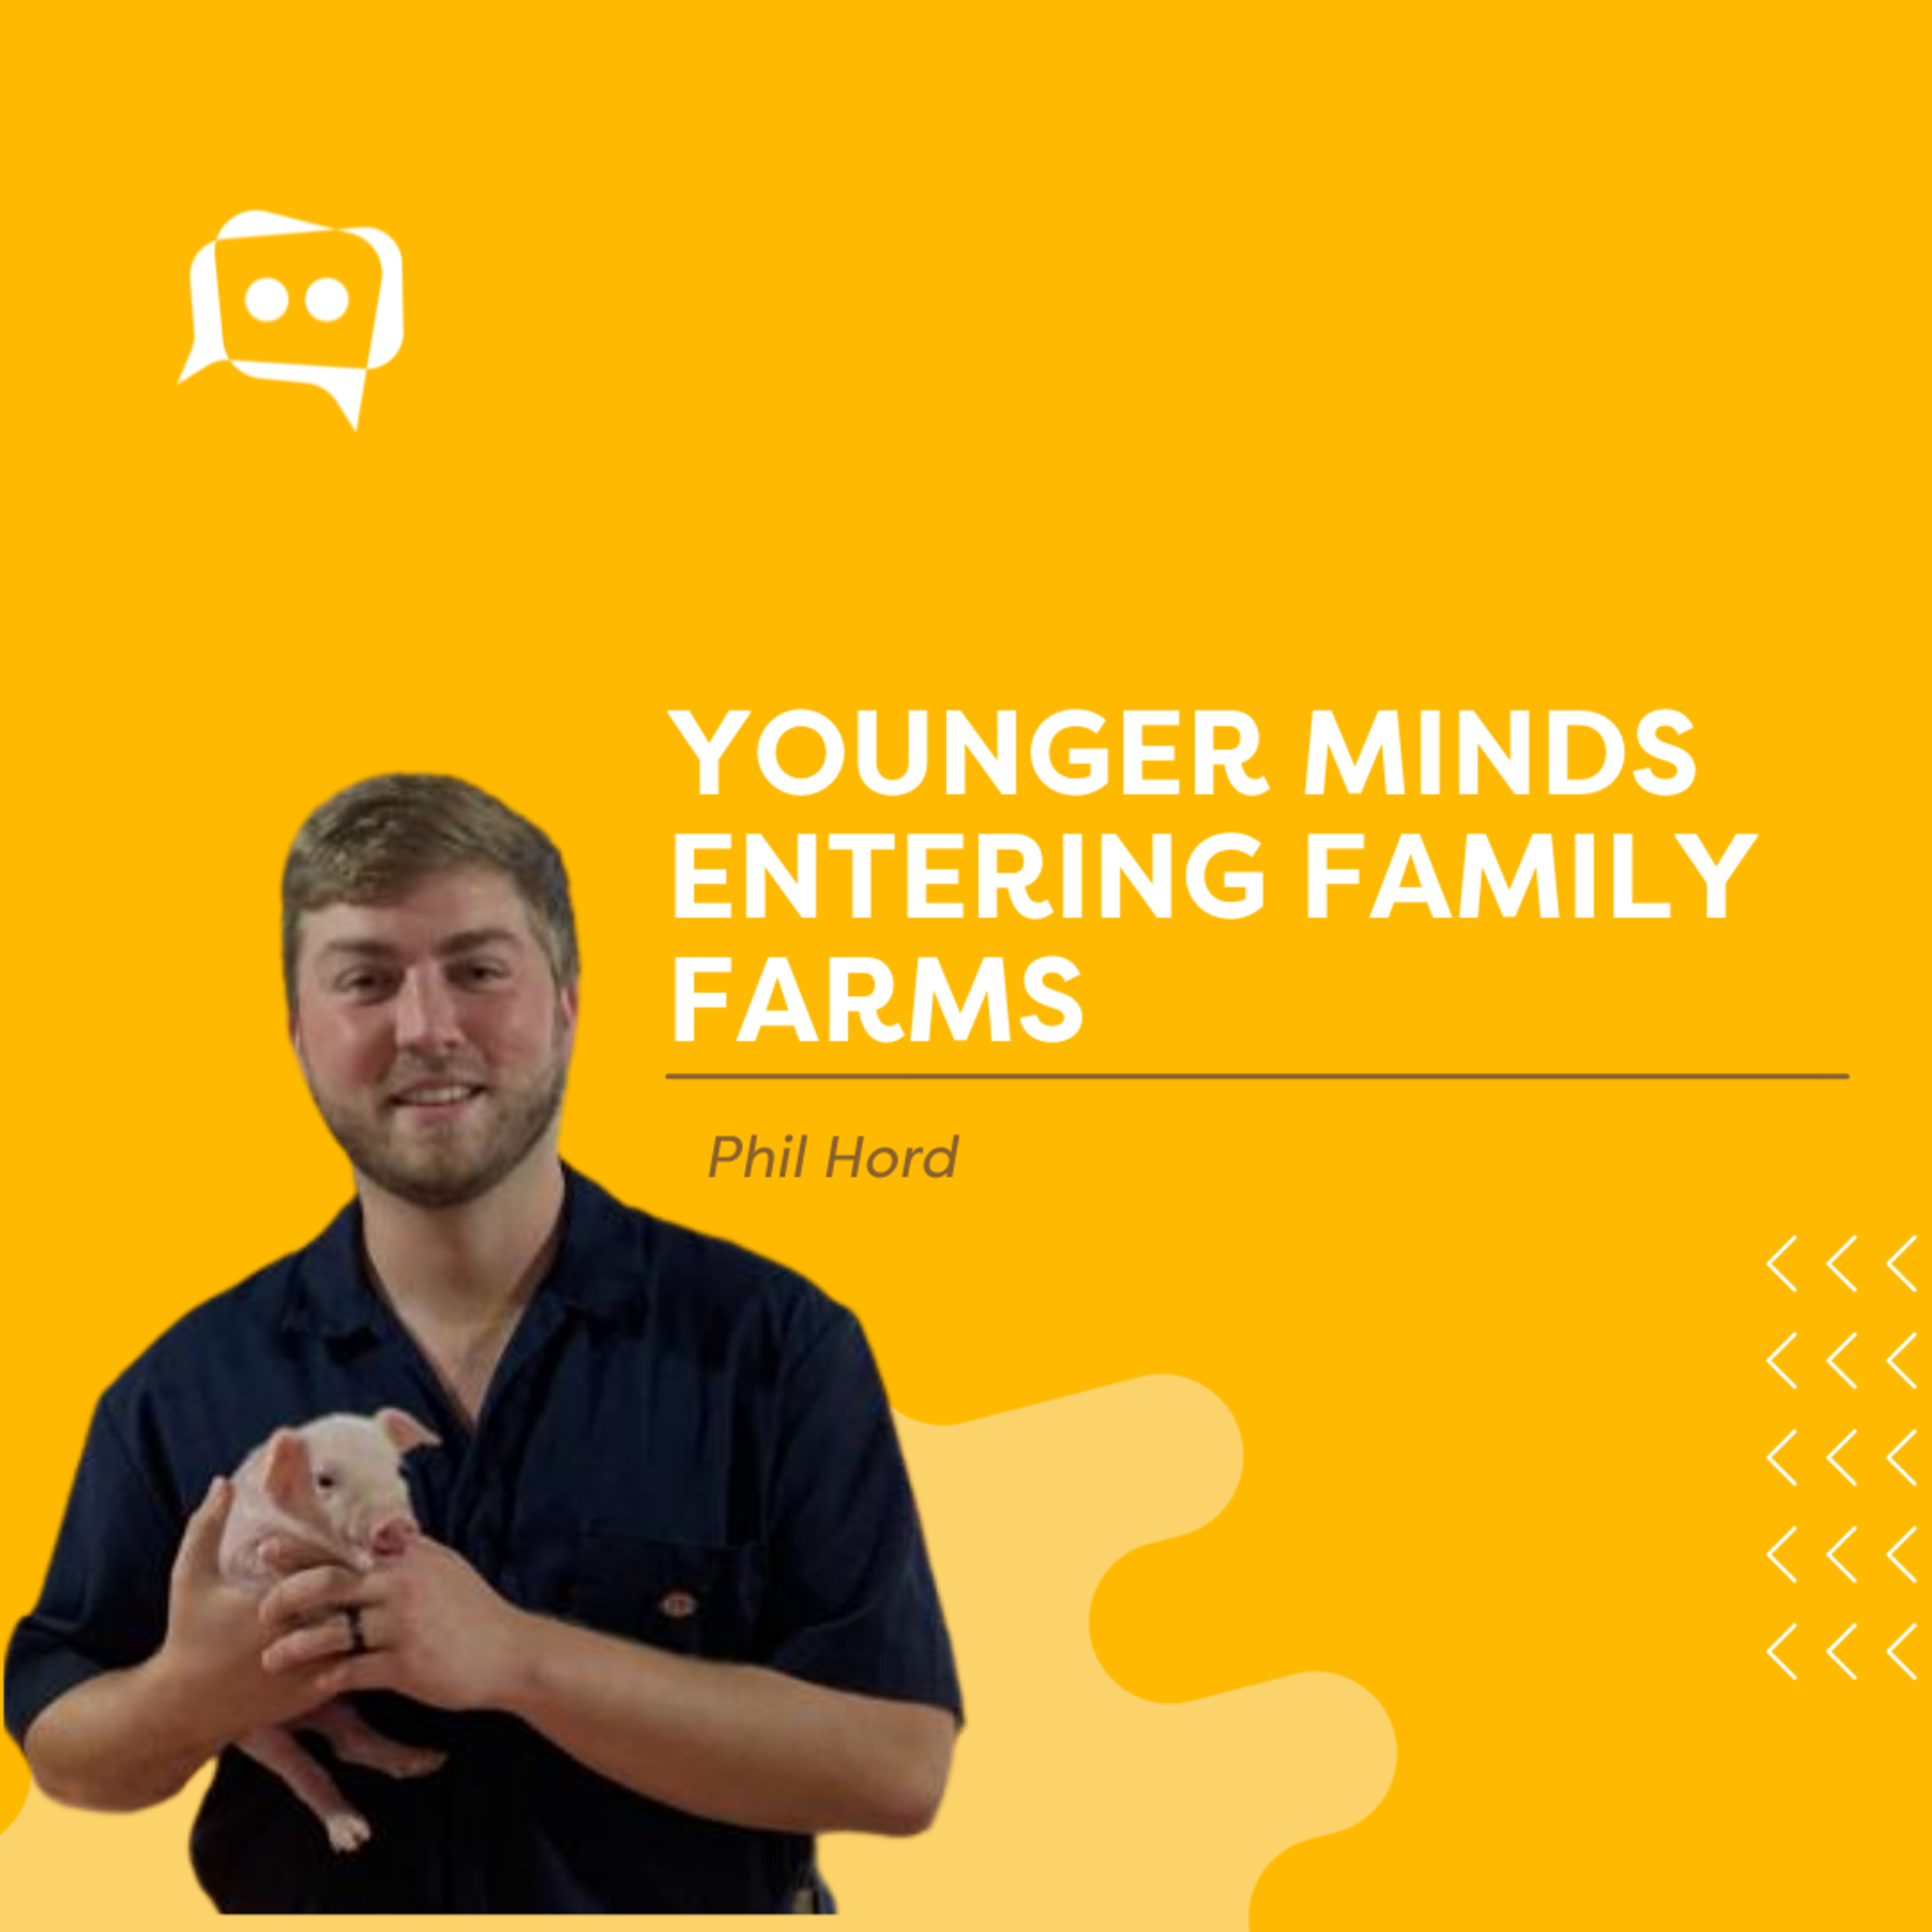 #SHORTS: Younger minds entering family farms, with Phil Hord